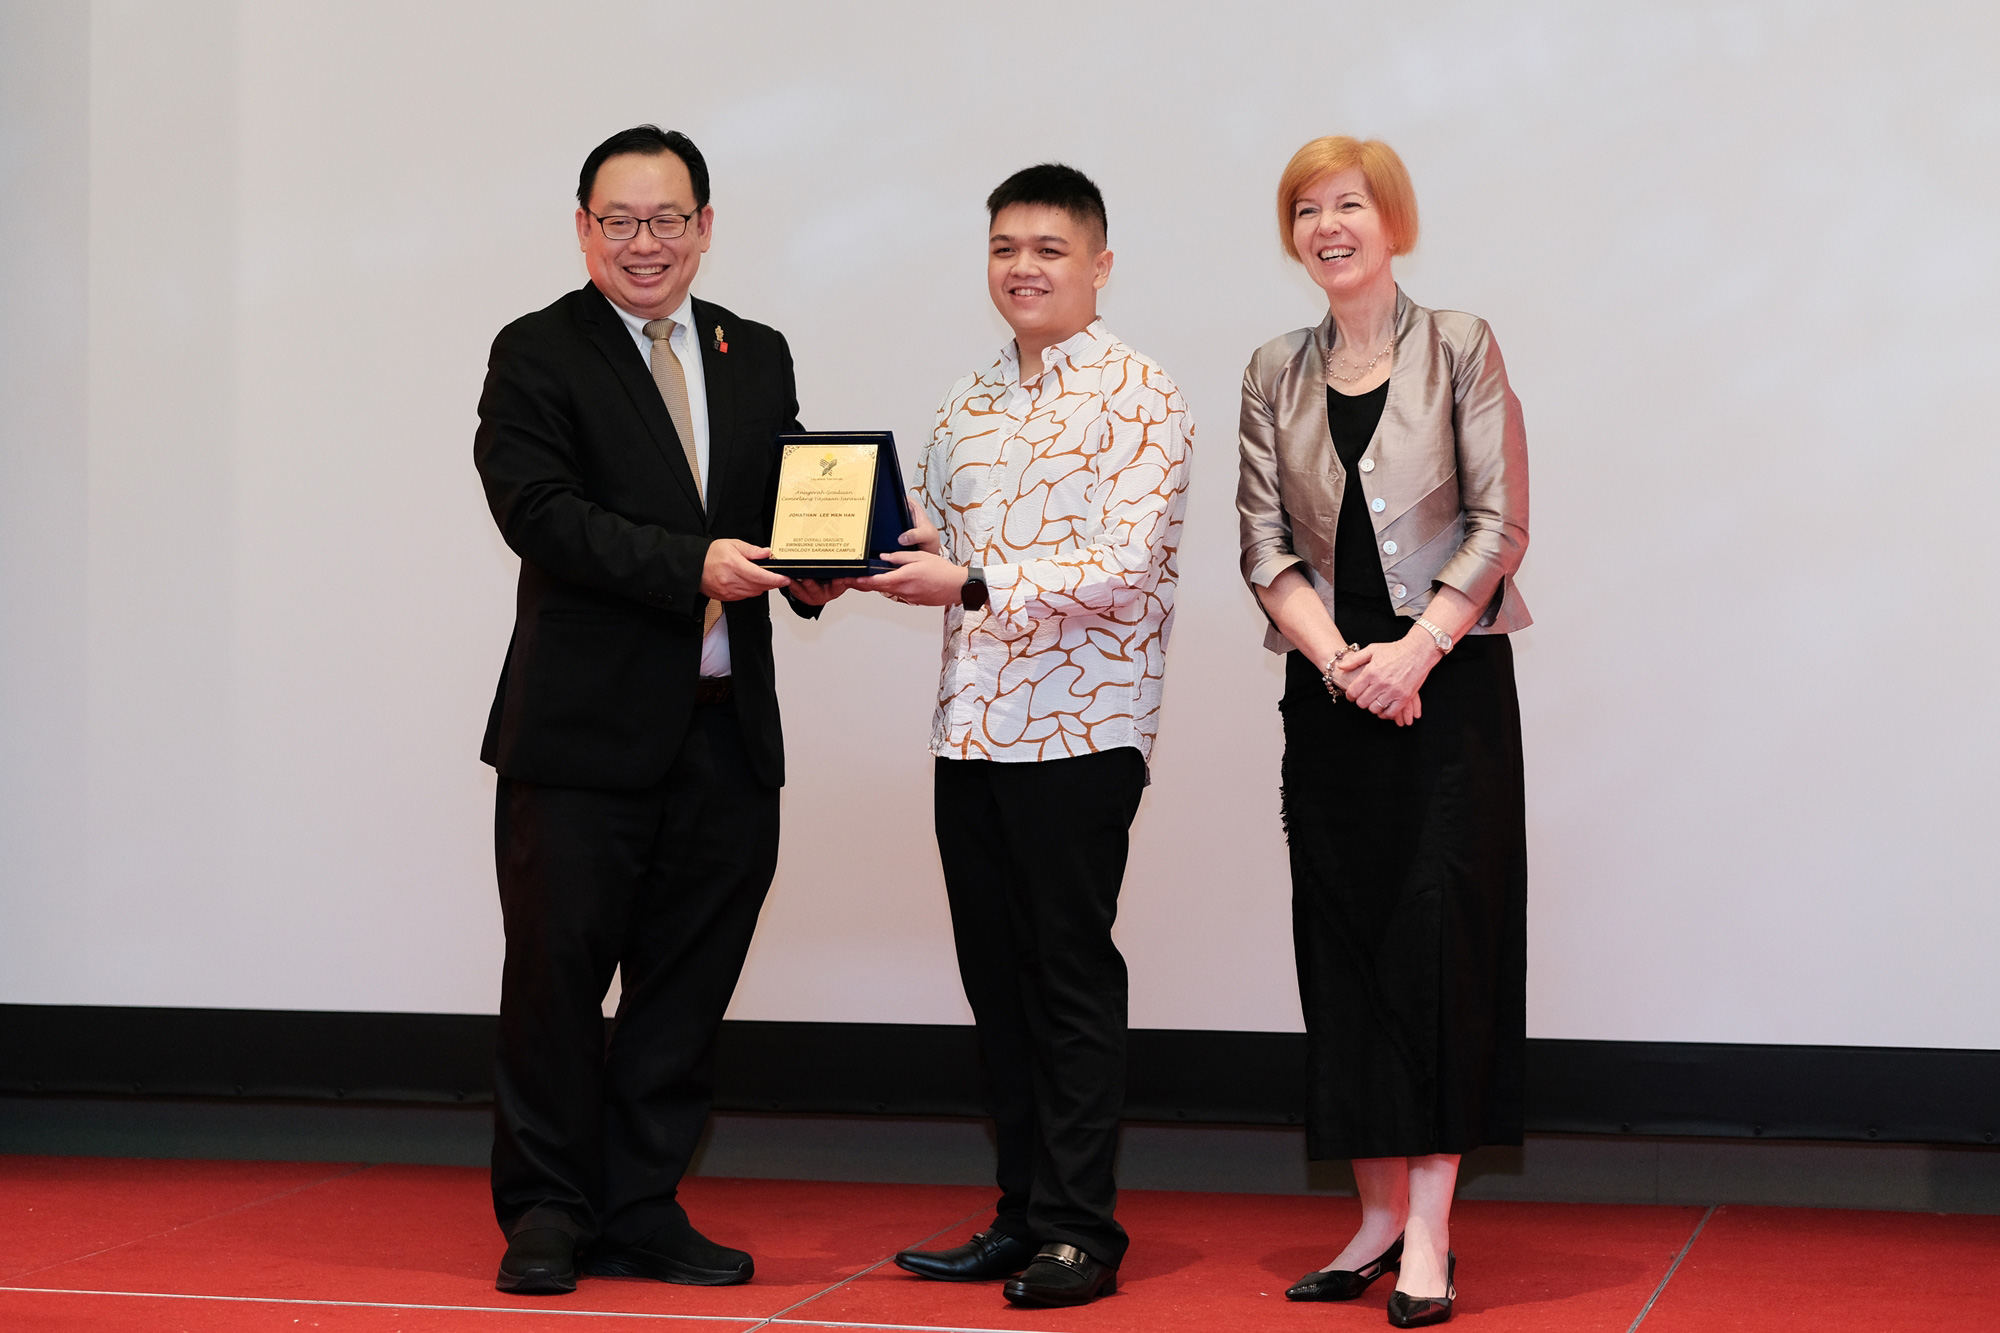 Jonathan Lee (centre) receiving the Sarawak Foundation's Outstanding Graduate Award from Ir Professor Lau Hieng Ho (left), witnessed by Professor Pascale Quester (right).